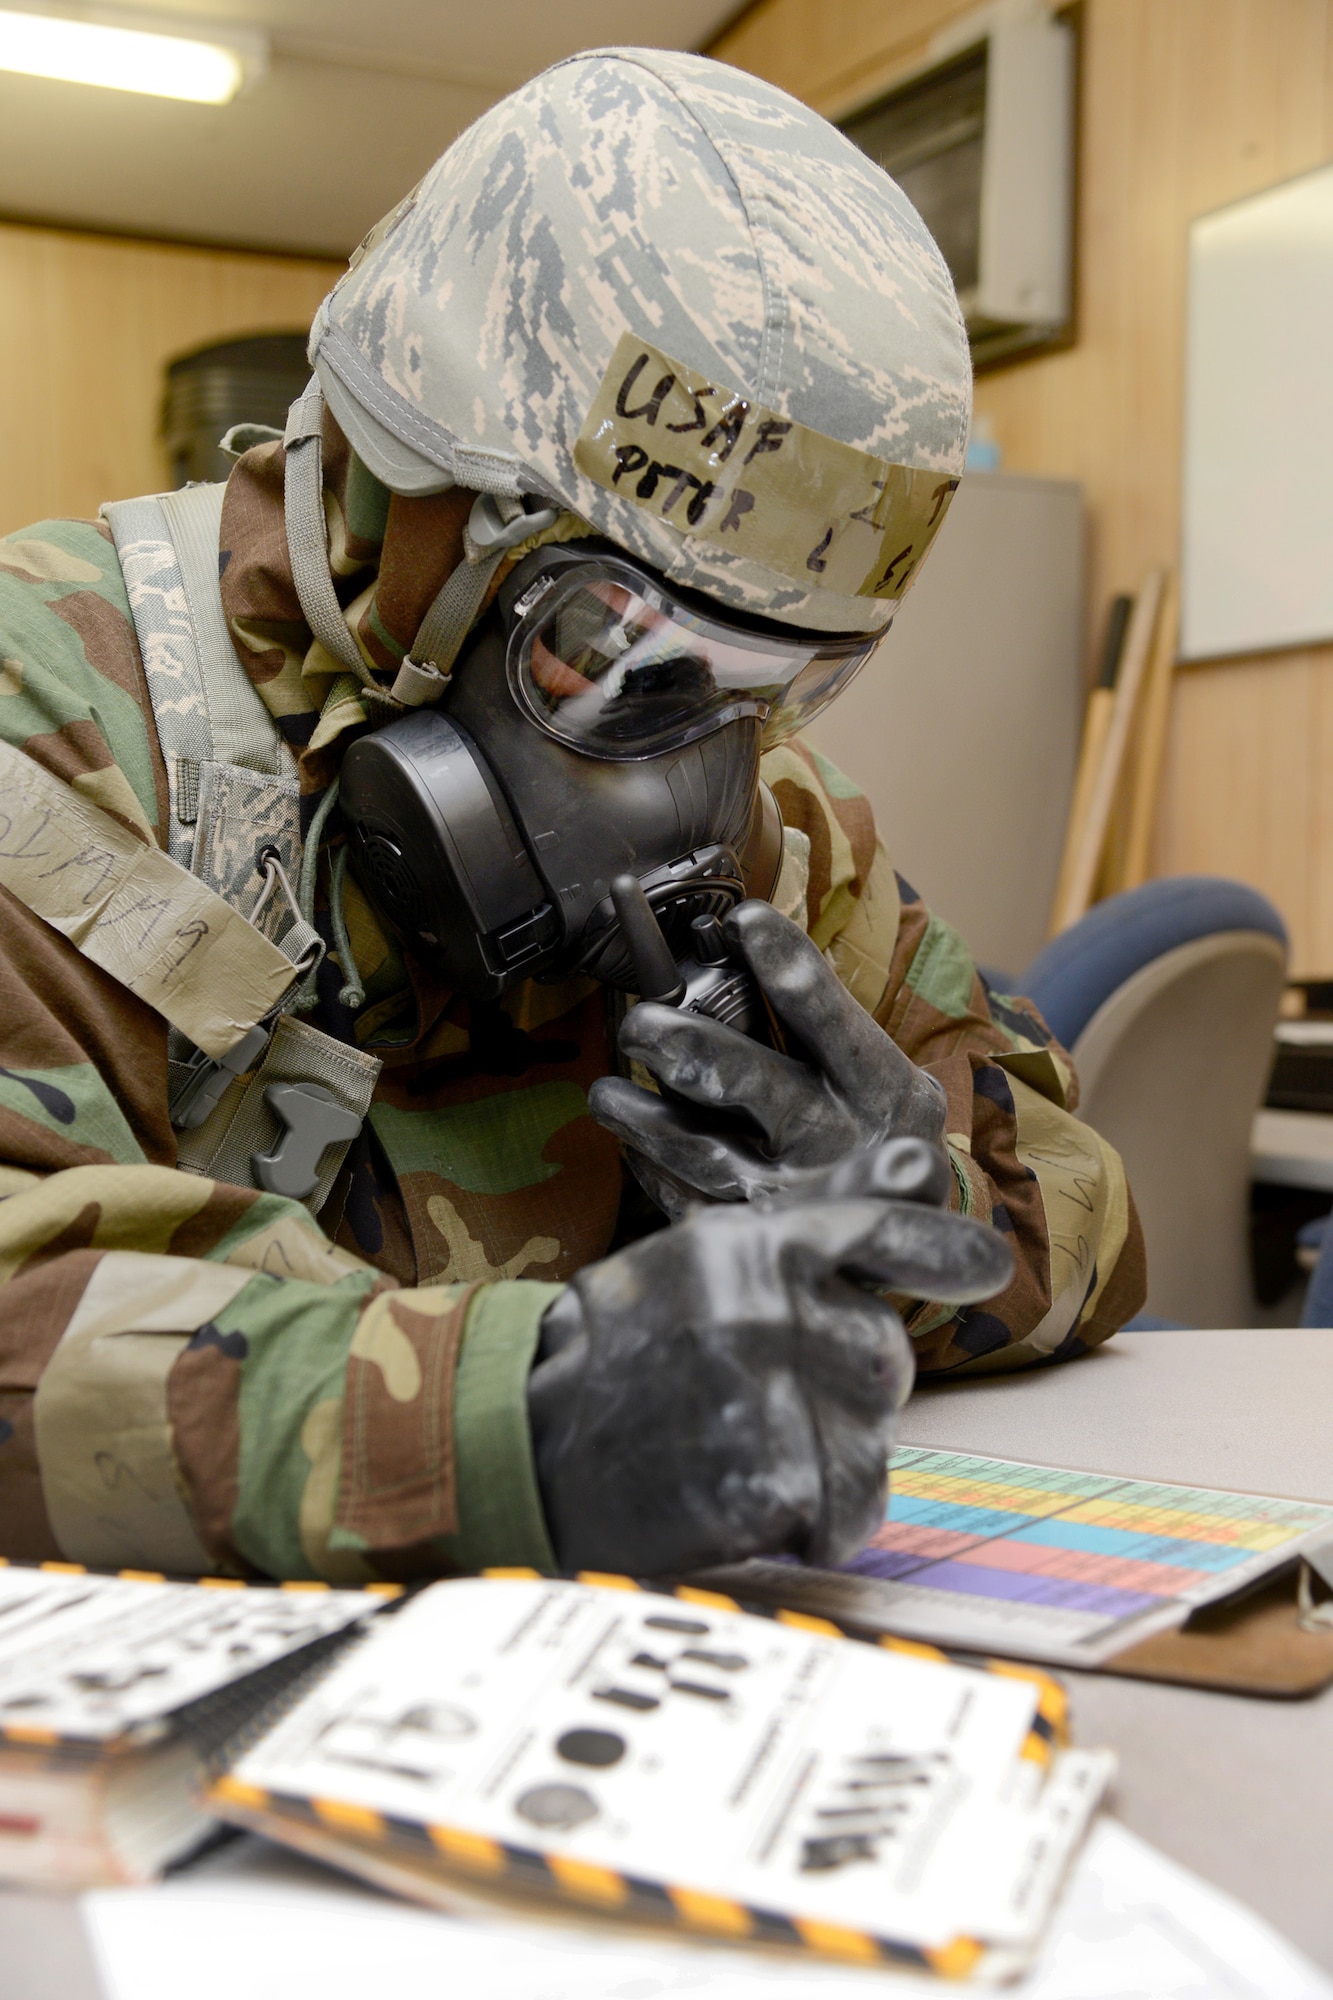 Tech. Sgt. Peter Silcox calls the command post during a recent war wagon exercise to report unexploded ordnances casualties and other incident issues. (Air Force photo by Kelly White)